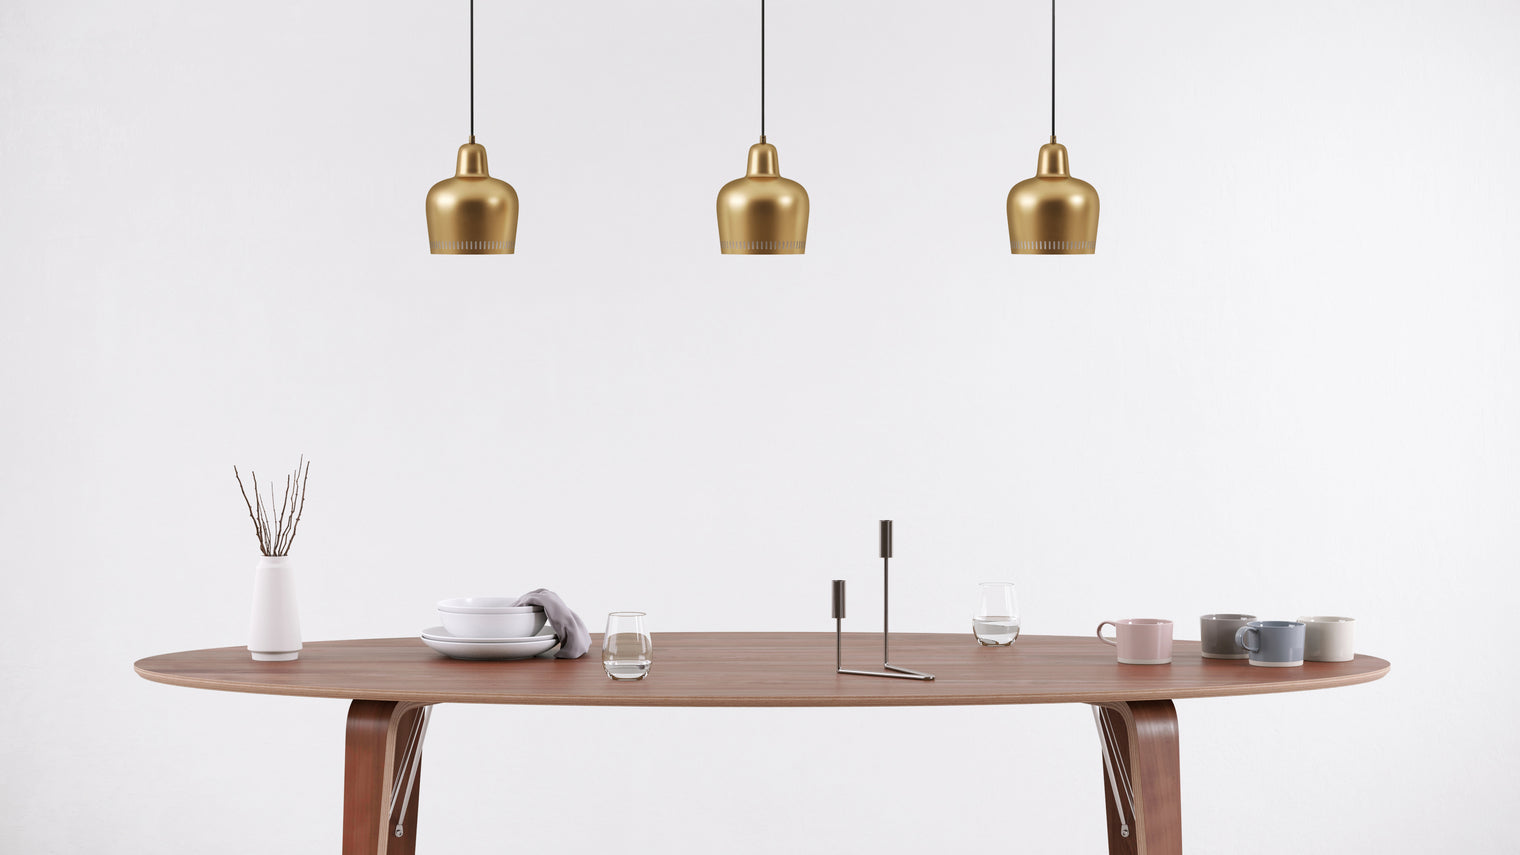 Bell-issimo | The Golden Bell Pendant Lamp is expertly crafted with single piece of steel featuring a polished brass coating on its exterior. It’s a stunning modern touch that draws the eye every time.
